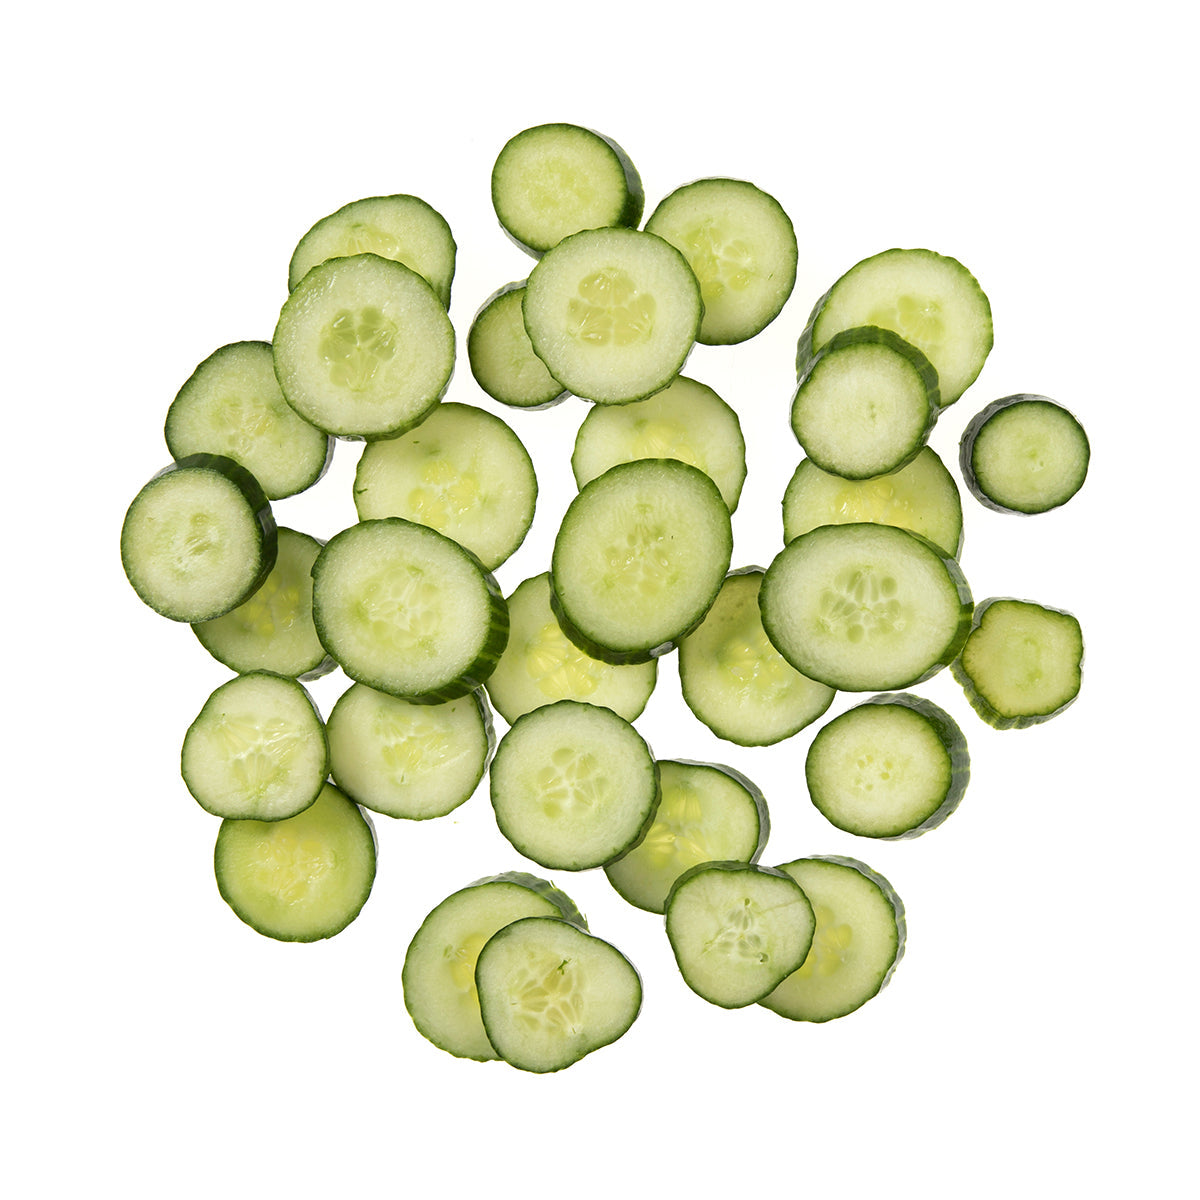 BoxNCase Sliced Hot House Cucumbers 5 LB